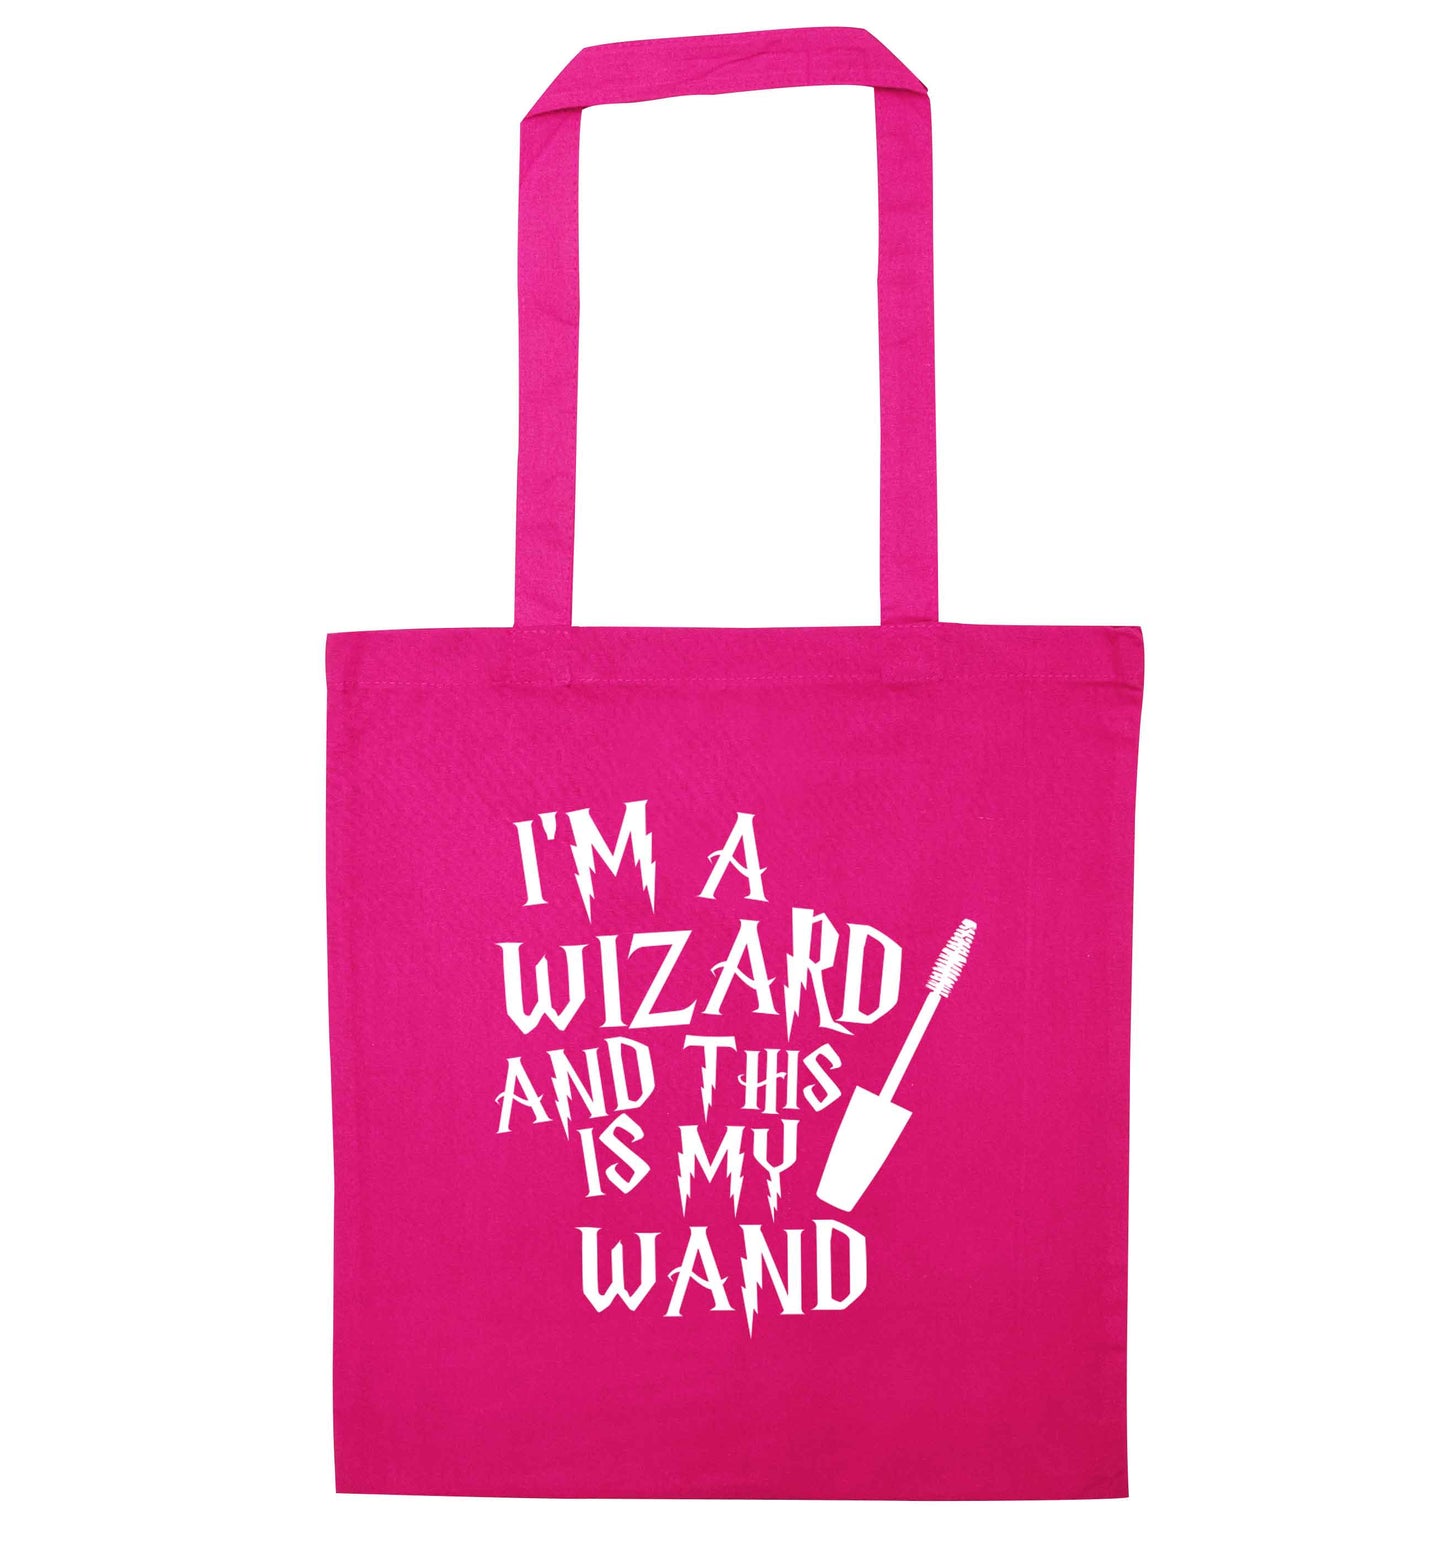 I'm a wizard and this is my wand pink tote bag